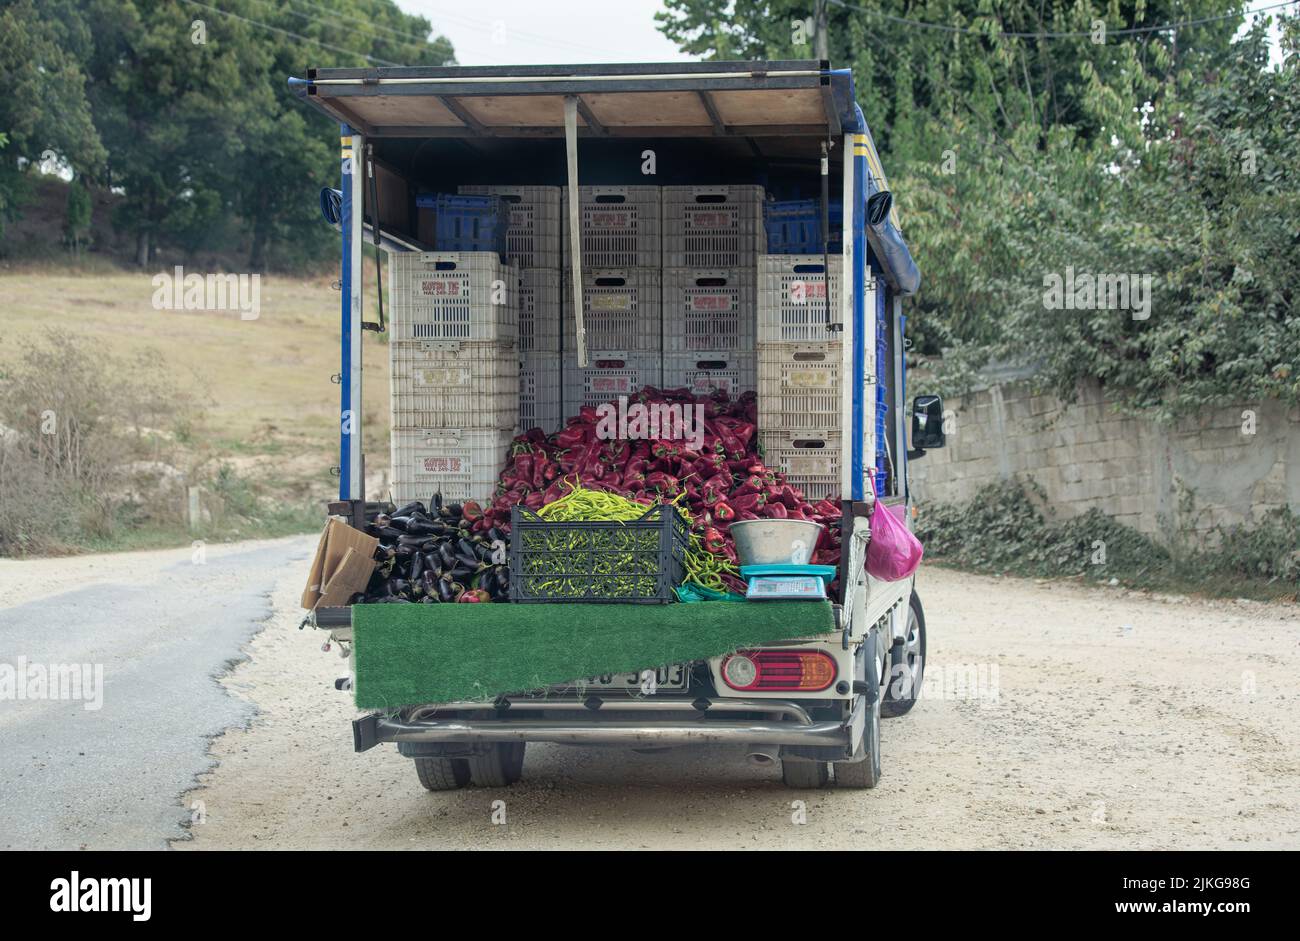 Street vegetable seller truck full of capia and green peppers, eggplants. Traditional way of grocery trade in old towns in Turkey. Stock Photo